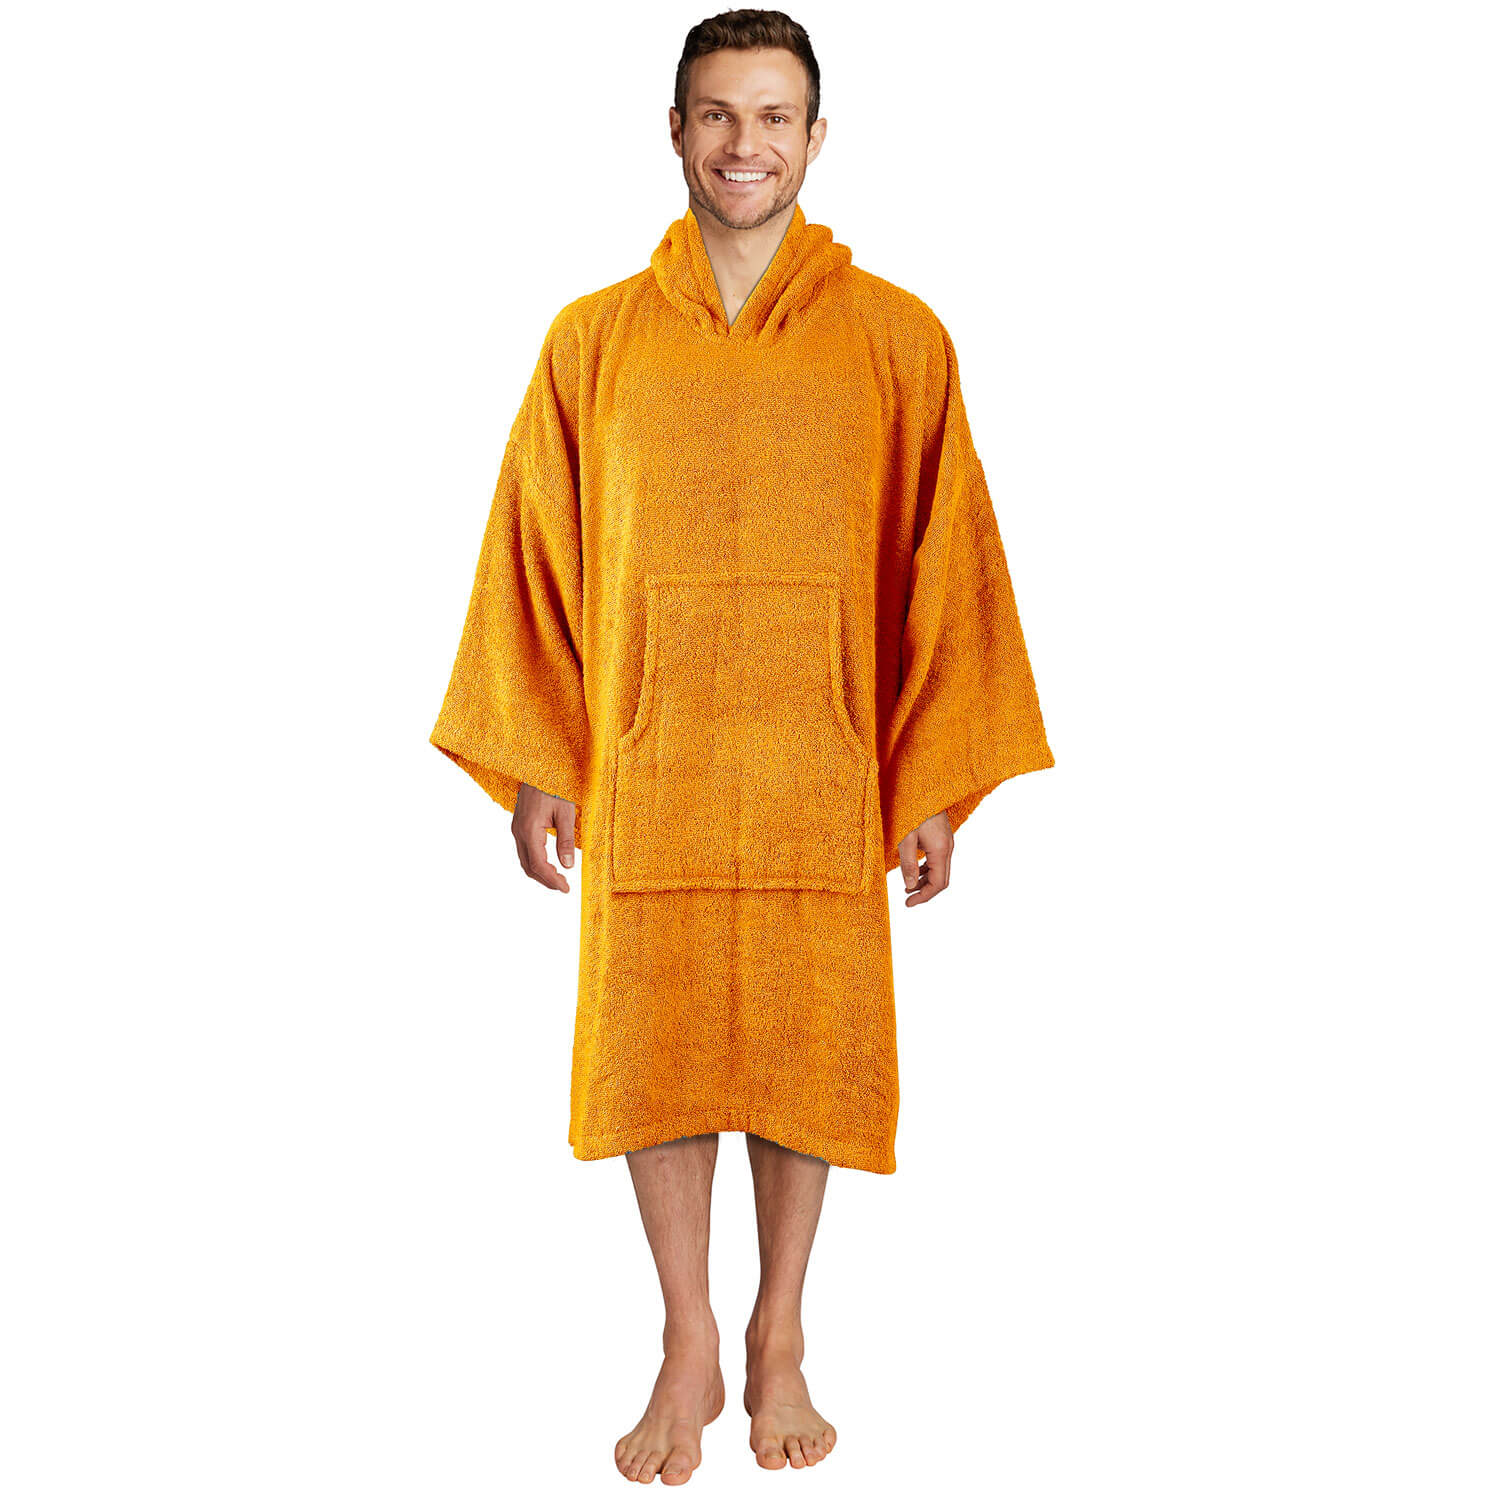 The Home Collection Adult Long Sleeve Poncho - Large - Orange 1 Shaws Department Stores